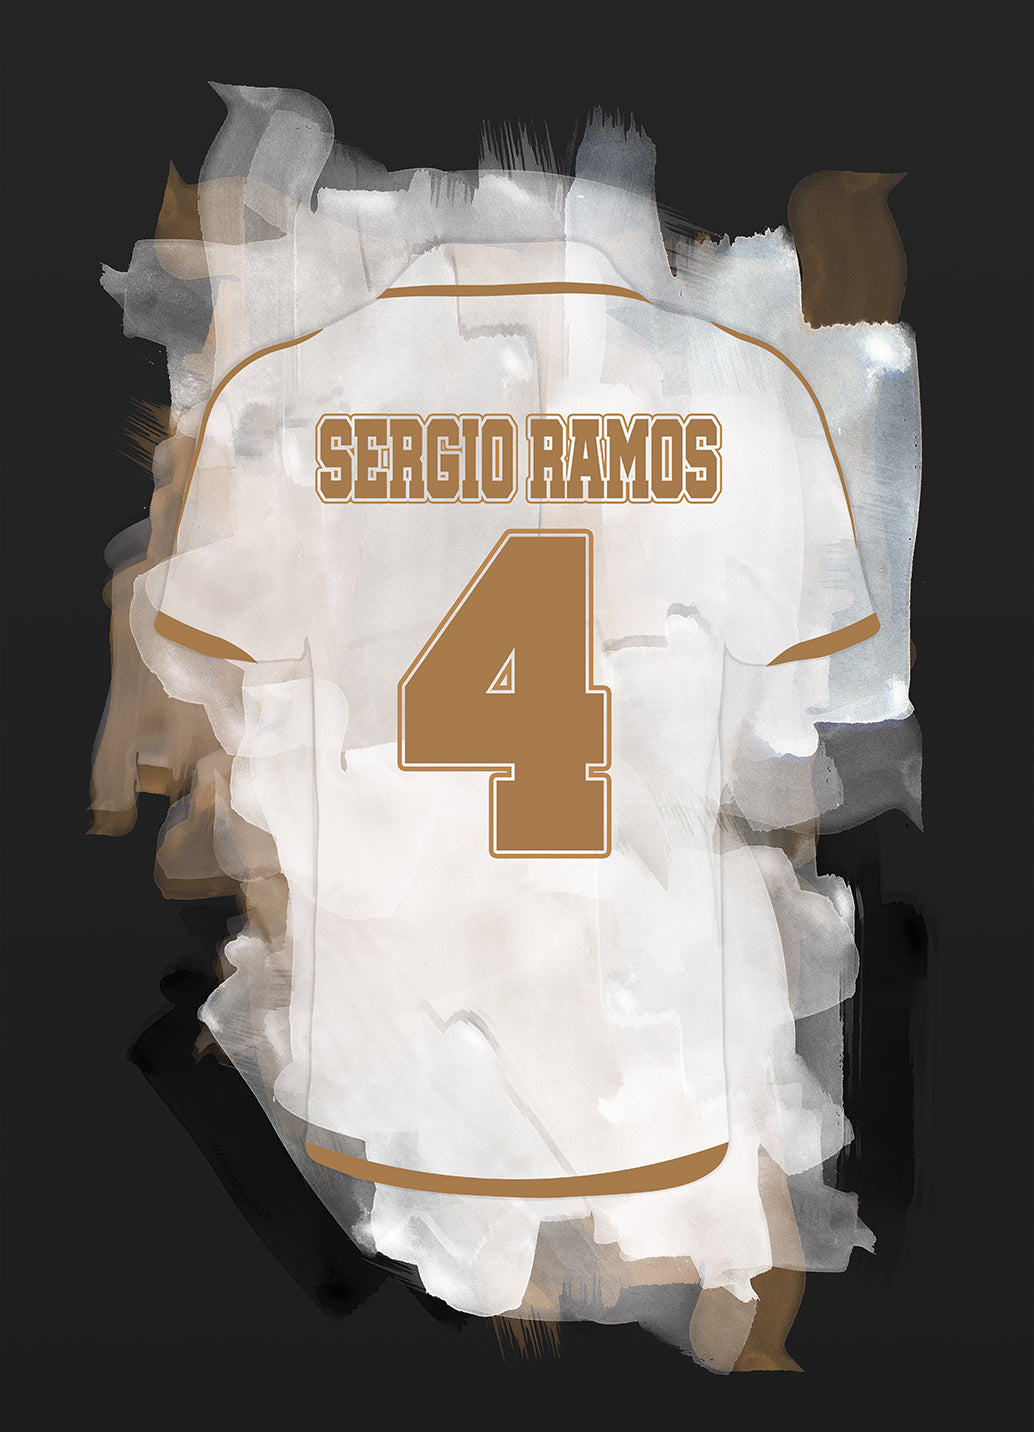 Ramos voetbal poster